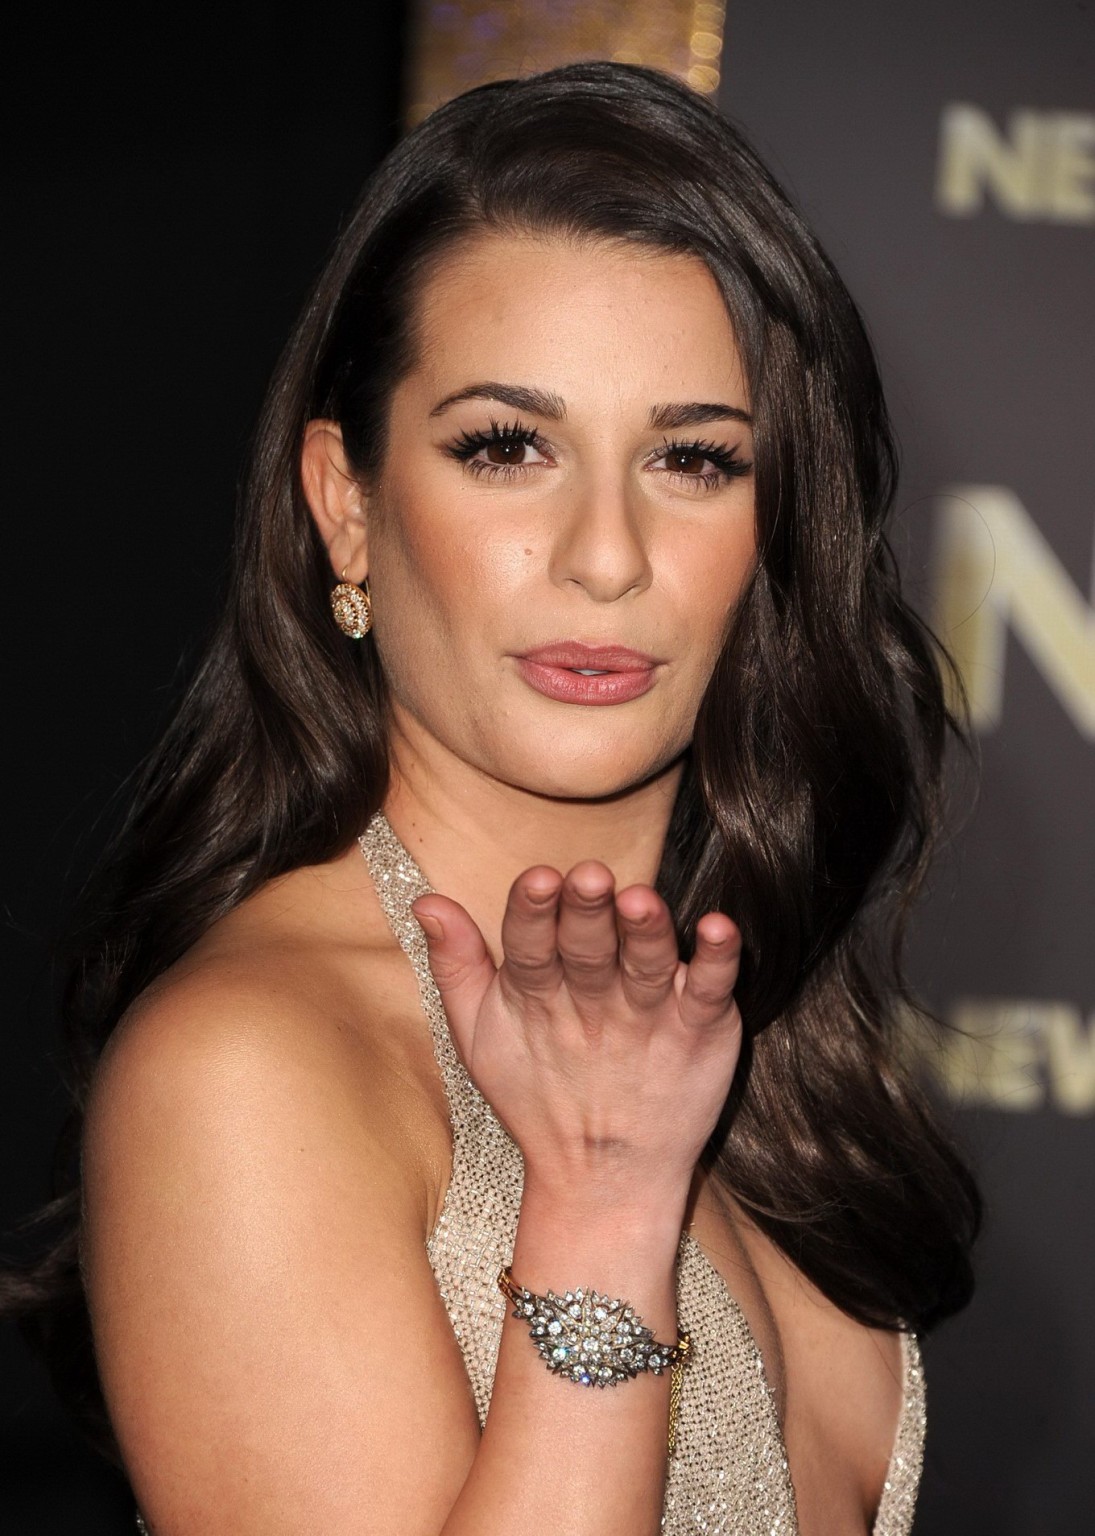 Lea Michele braless showing side boob at the 'New Year's Eve' premiere in LA #75279859